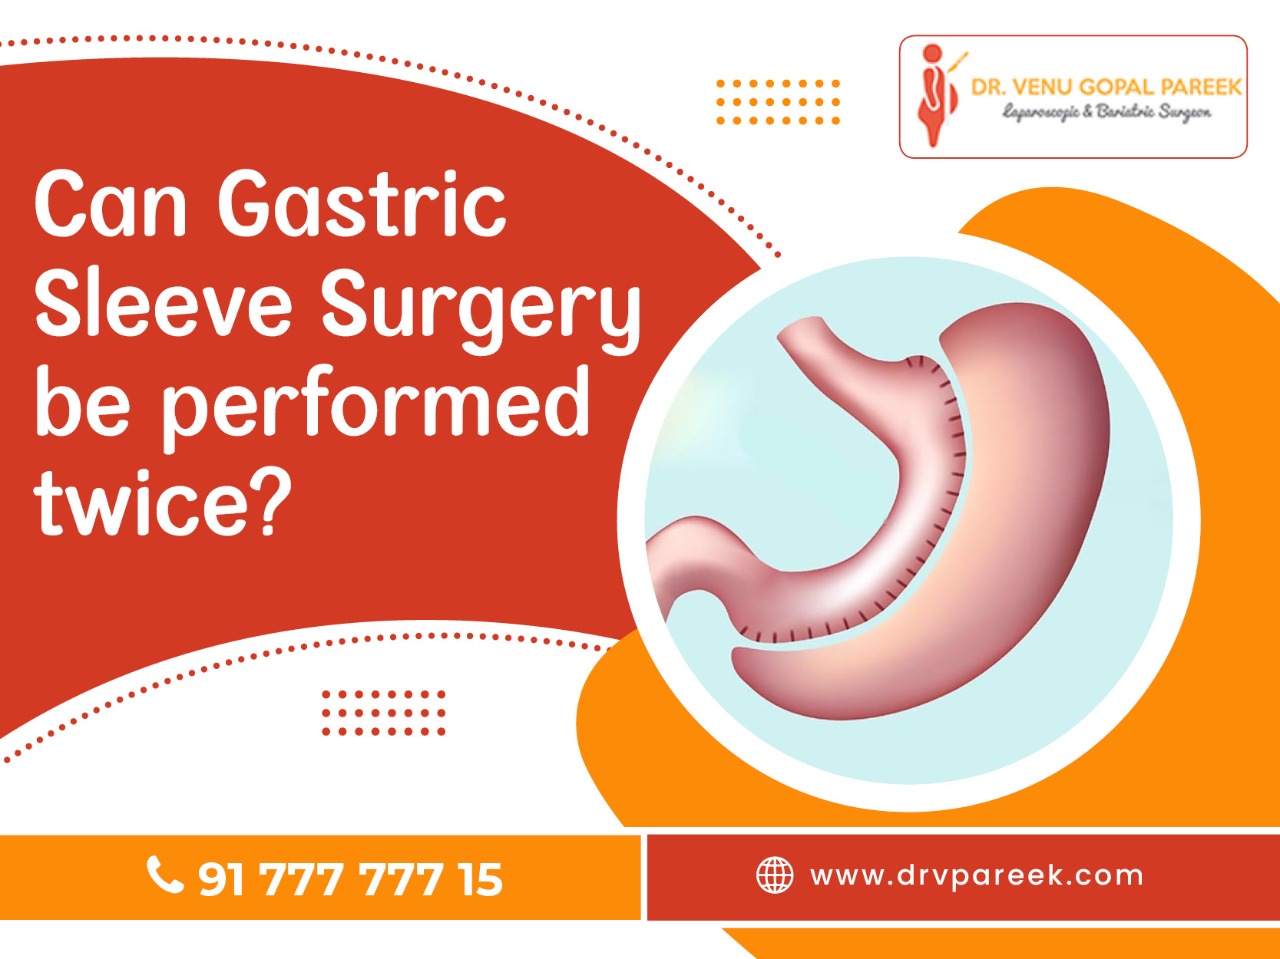 can gastric sleeve surgery be performed twice